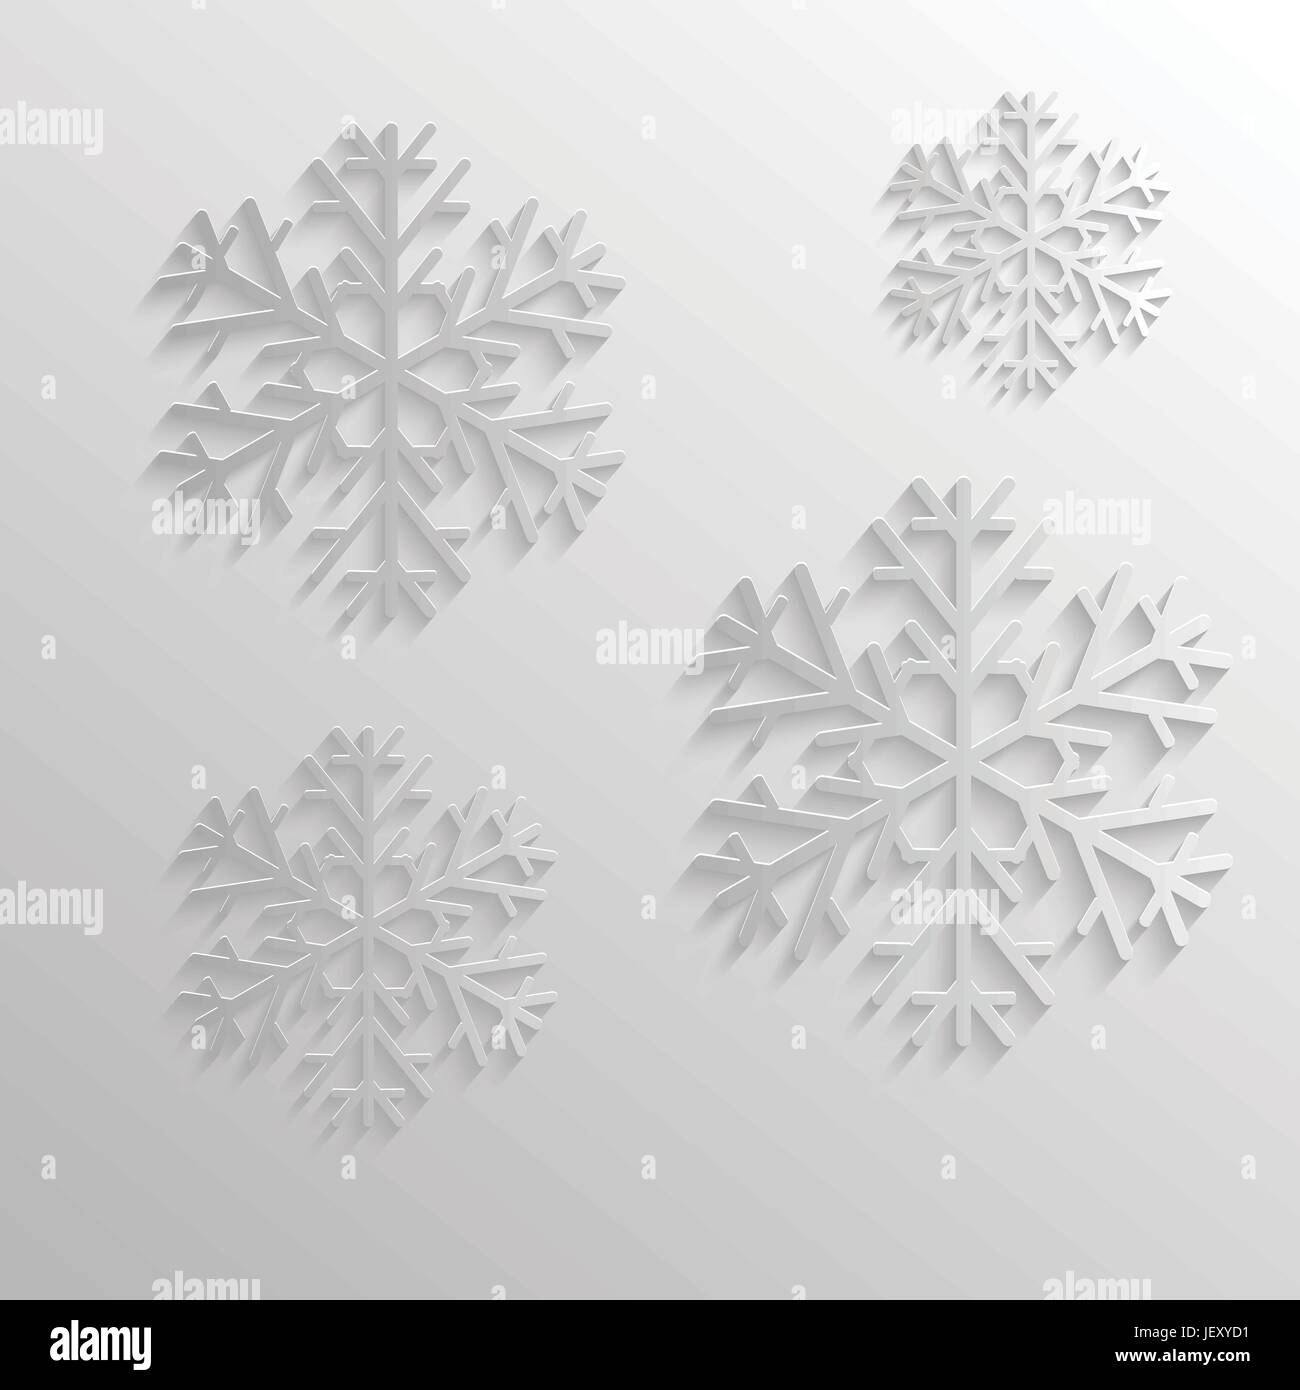 present, greeting, beautiful, beauteously, nice, isolated, holiday, winter, Stock Vector